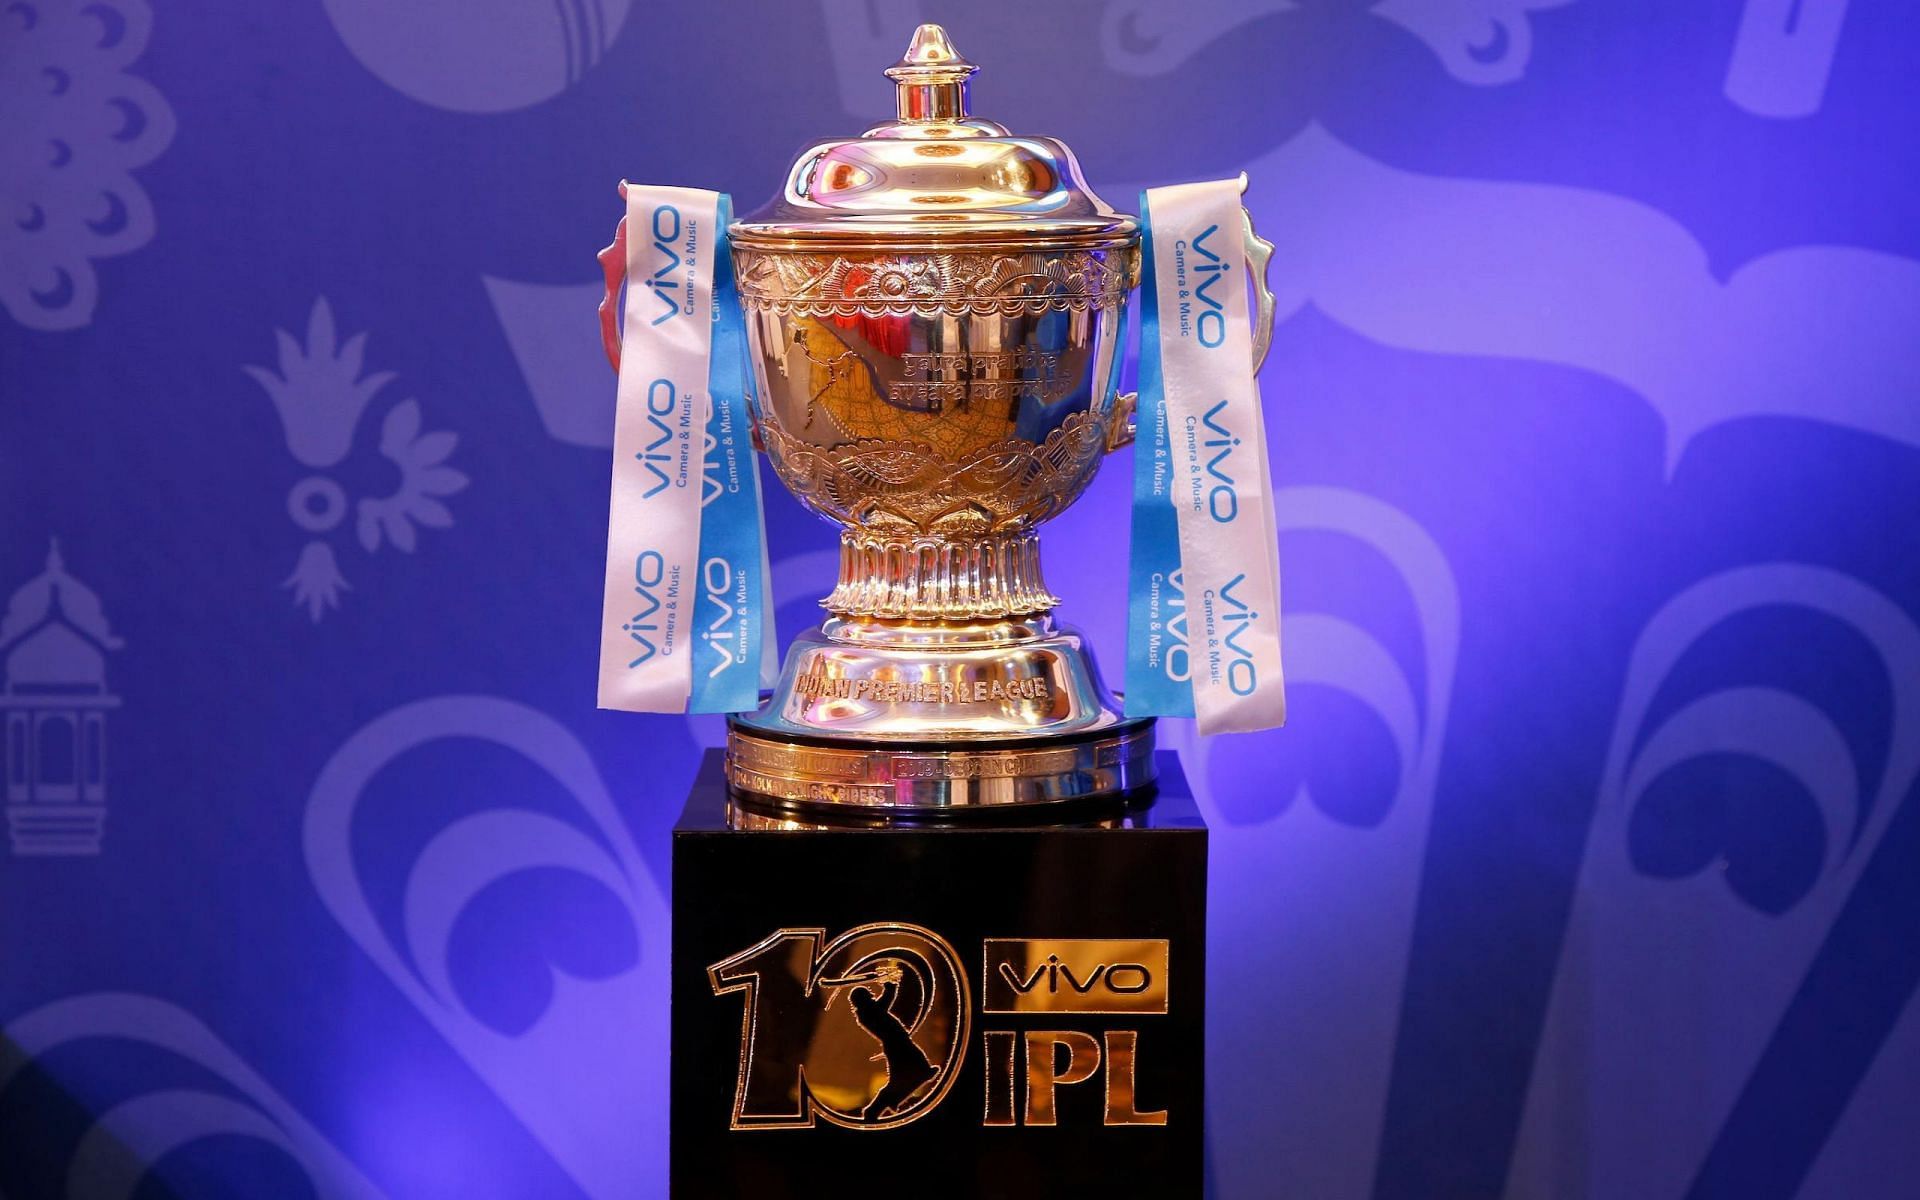 The Indian Premier League is all set to expand further with two new franchises from the 2022 season.